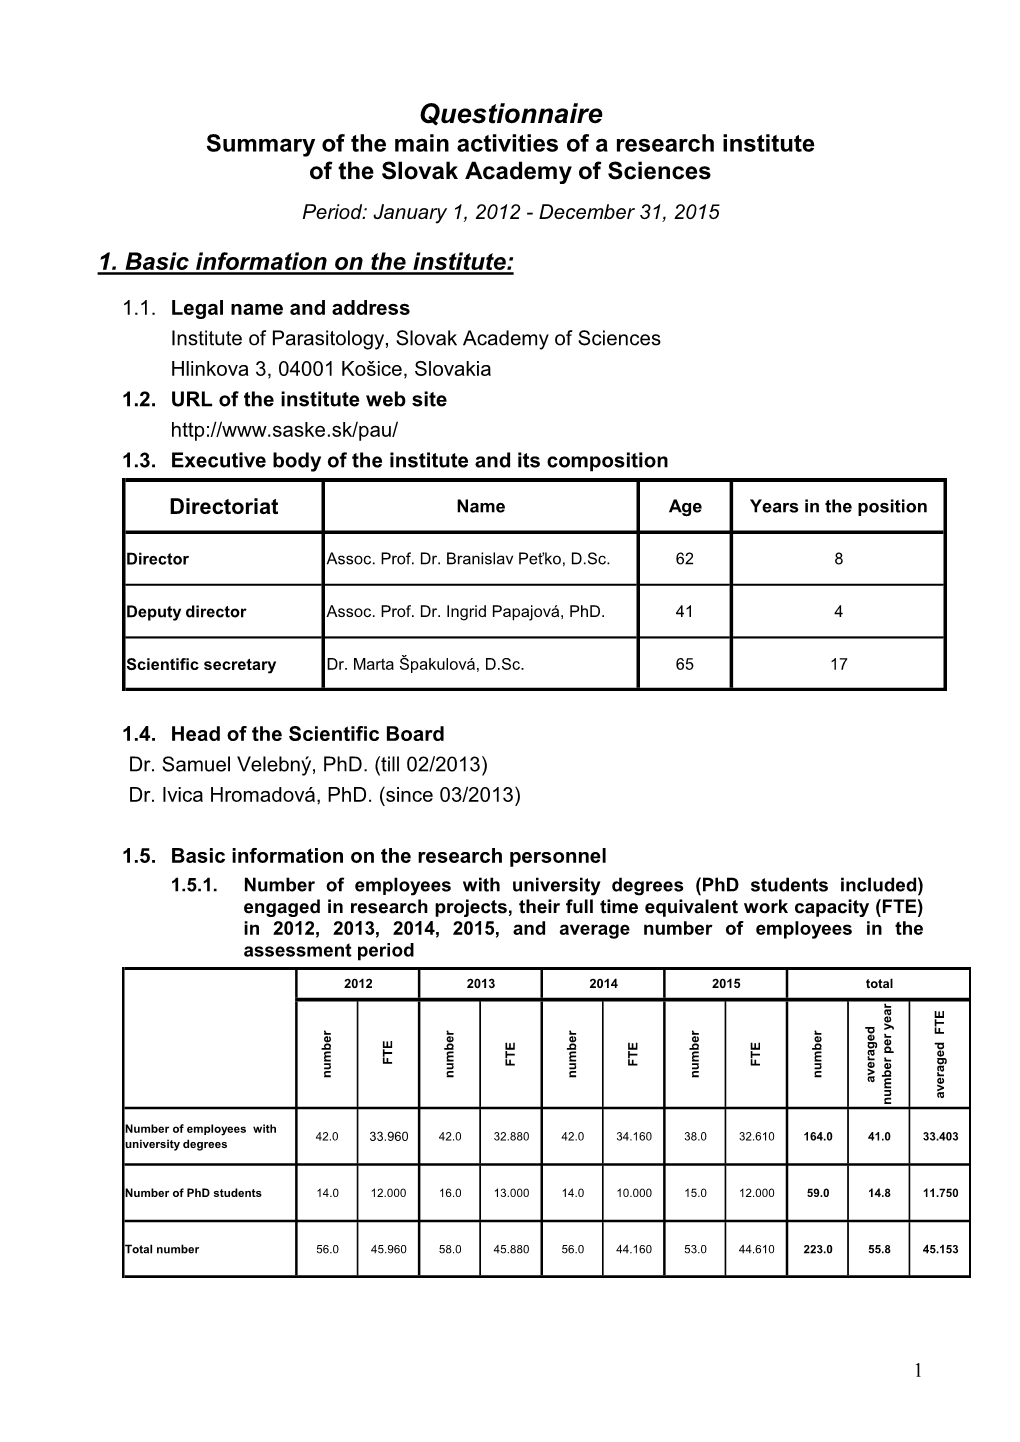 Questionnaire Summary of the Main Activities of a Research Institute of the Slovak Academy of Sciences